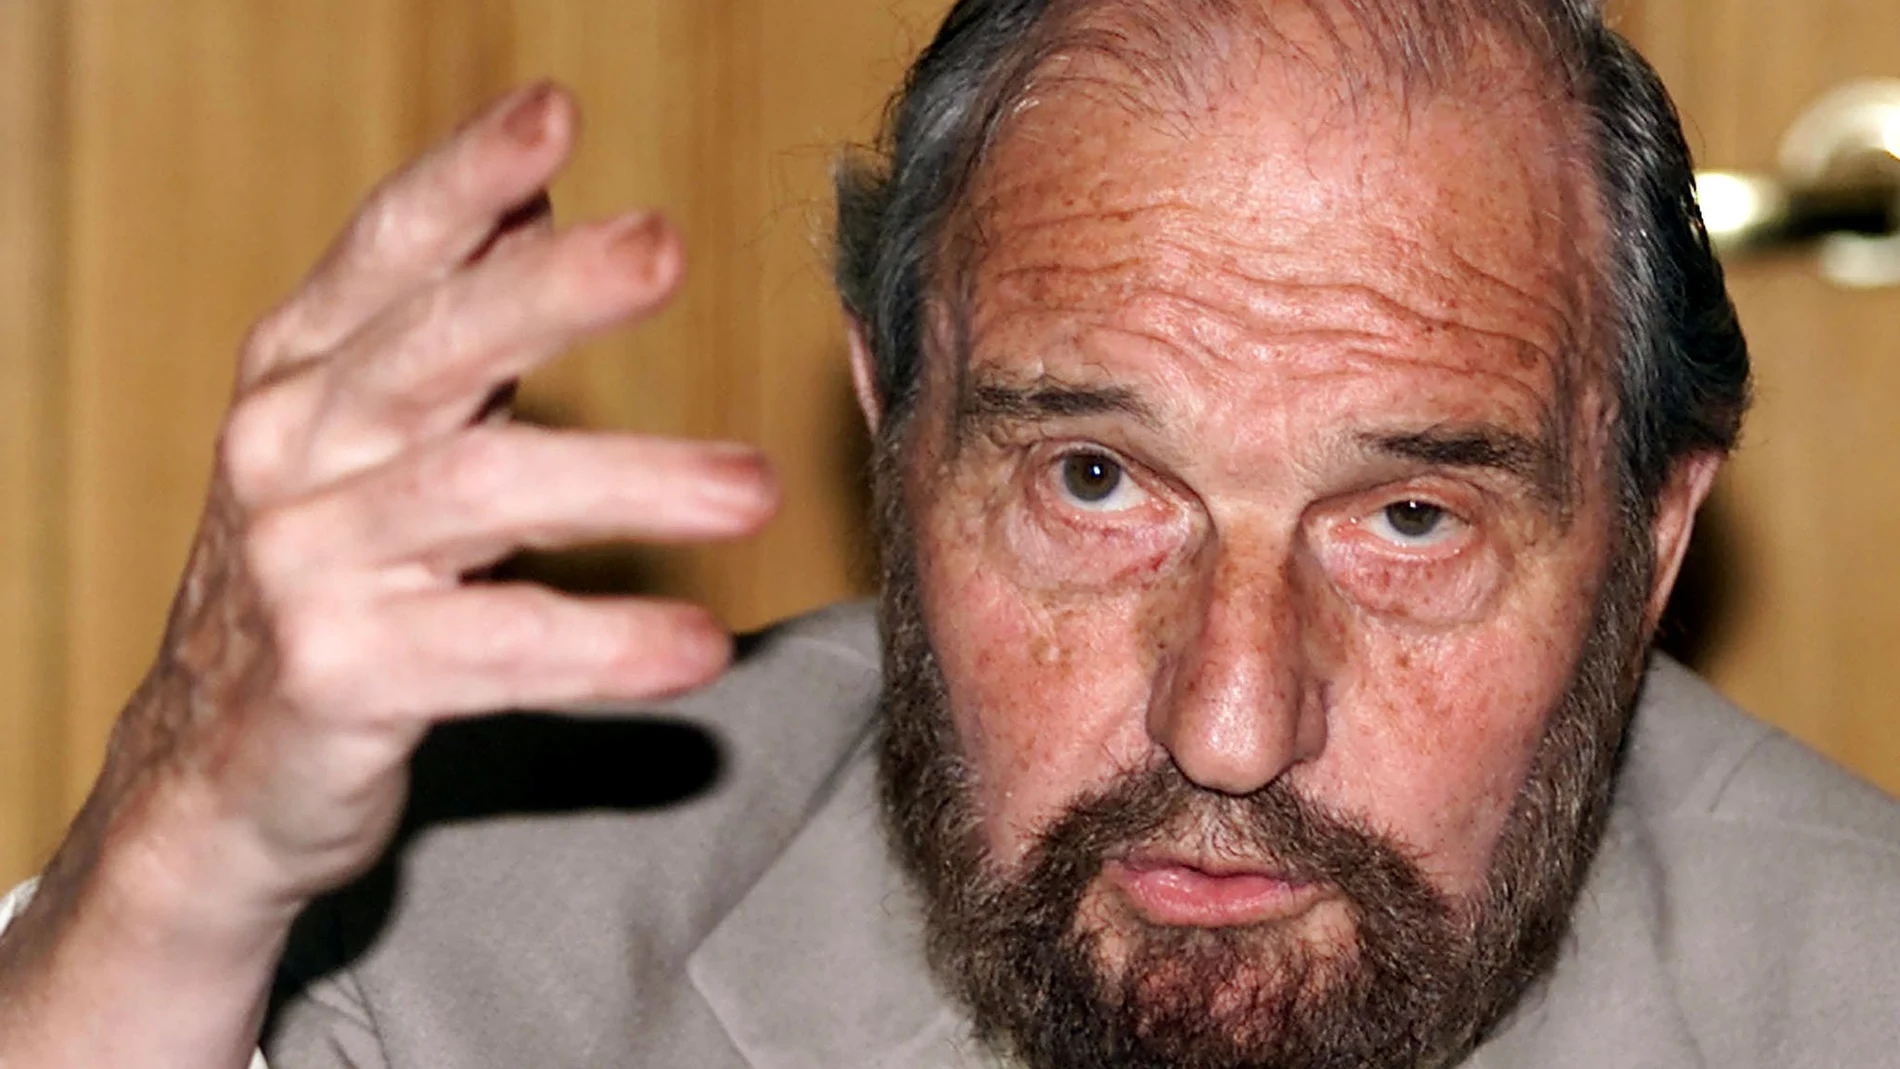 FILE PHOTO: Soviet secret agent George Blake gestures as he speaks at a presentation of a book of letters written by other spies from a British prison, in Moscow June 28, 2001. Blake -- a notorious traitor in Britain and legendary hero in Russia -- escaped from a British jail in 1966 while serving a 42 year sentence for passing secrets to Moscow./File Photo